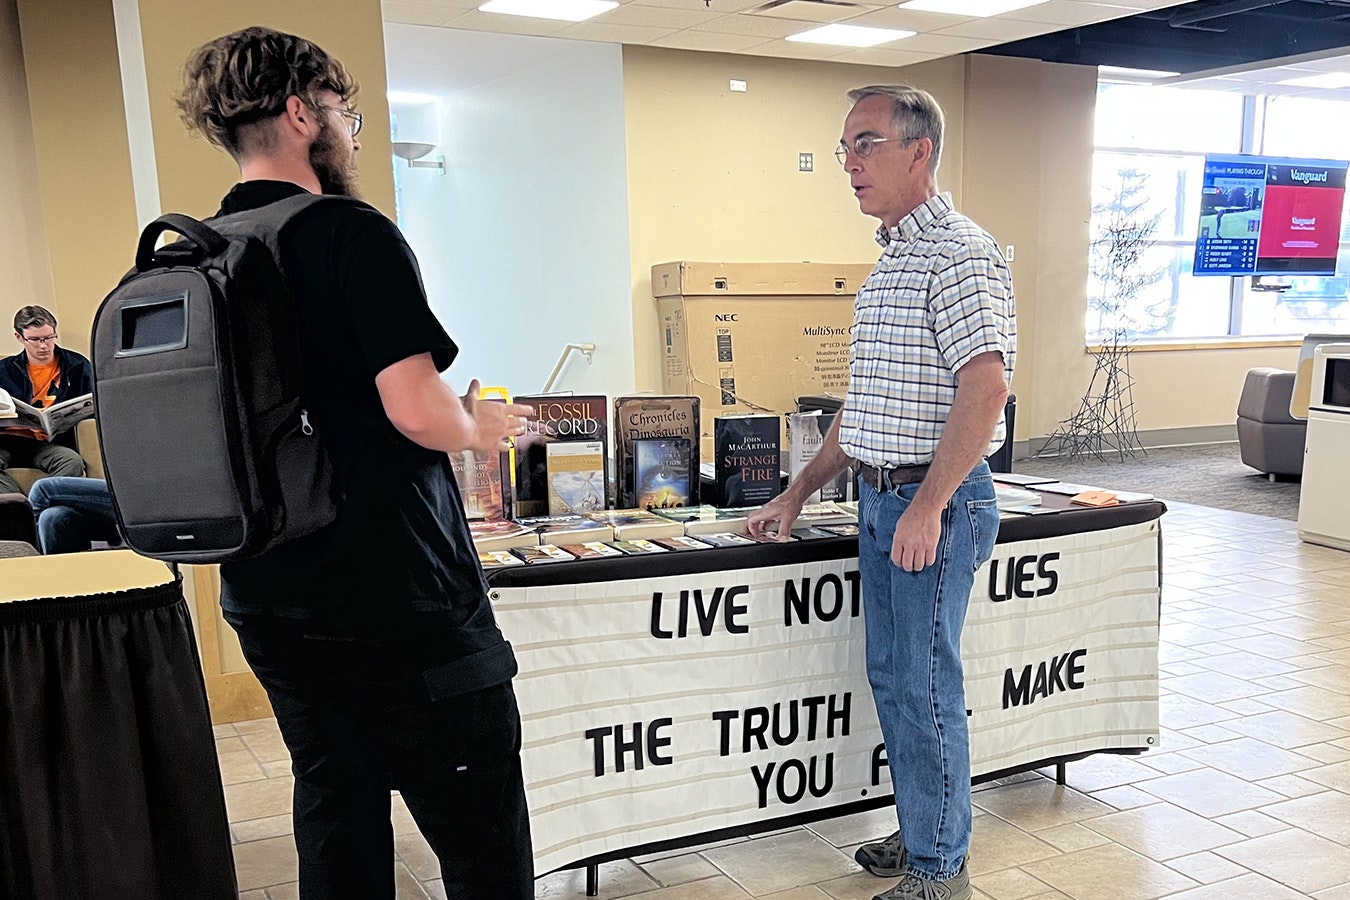 Laramie church elder Todd Schmidt debates religious themes and ideas with a University of Wyoming student recently in the Wyoming Union. Schmidt had been banned from having his table there for a year, but a recent court ruling lifted the ban and he's returned, setting his table up every Friday from 9 a.m. to 5 p.m.